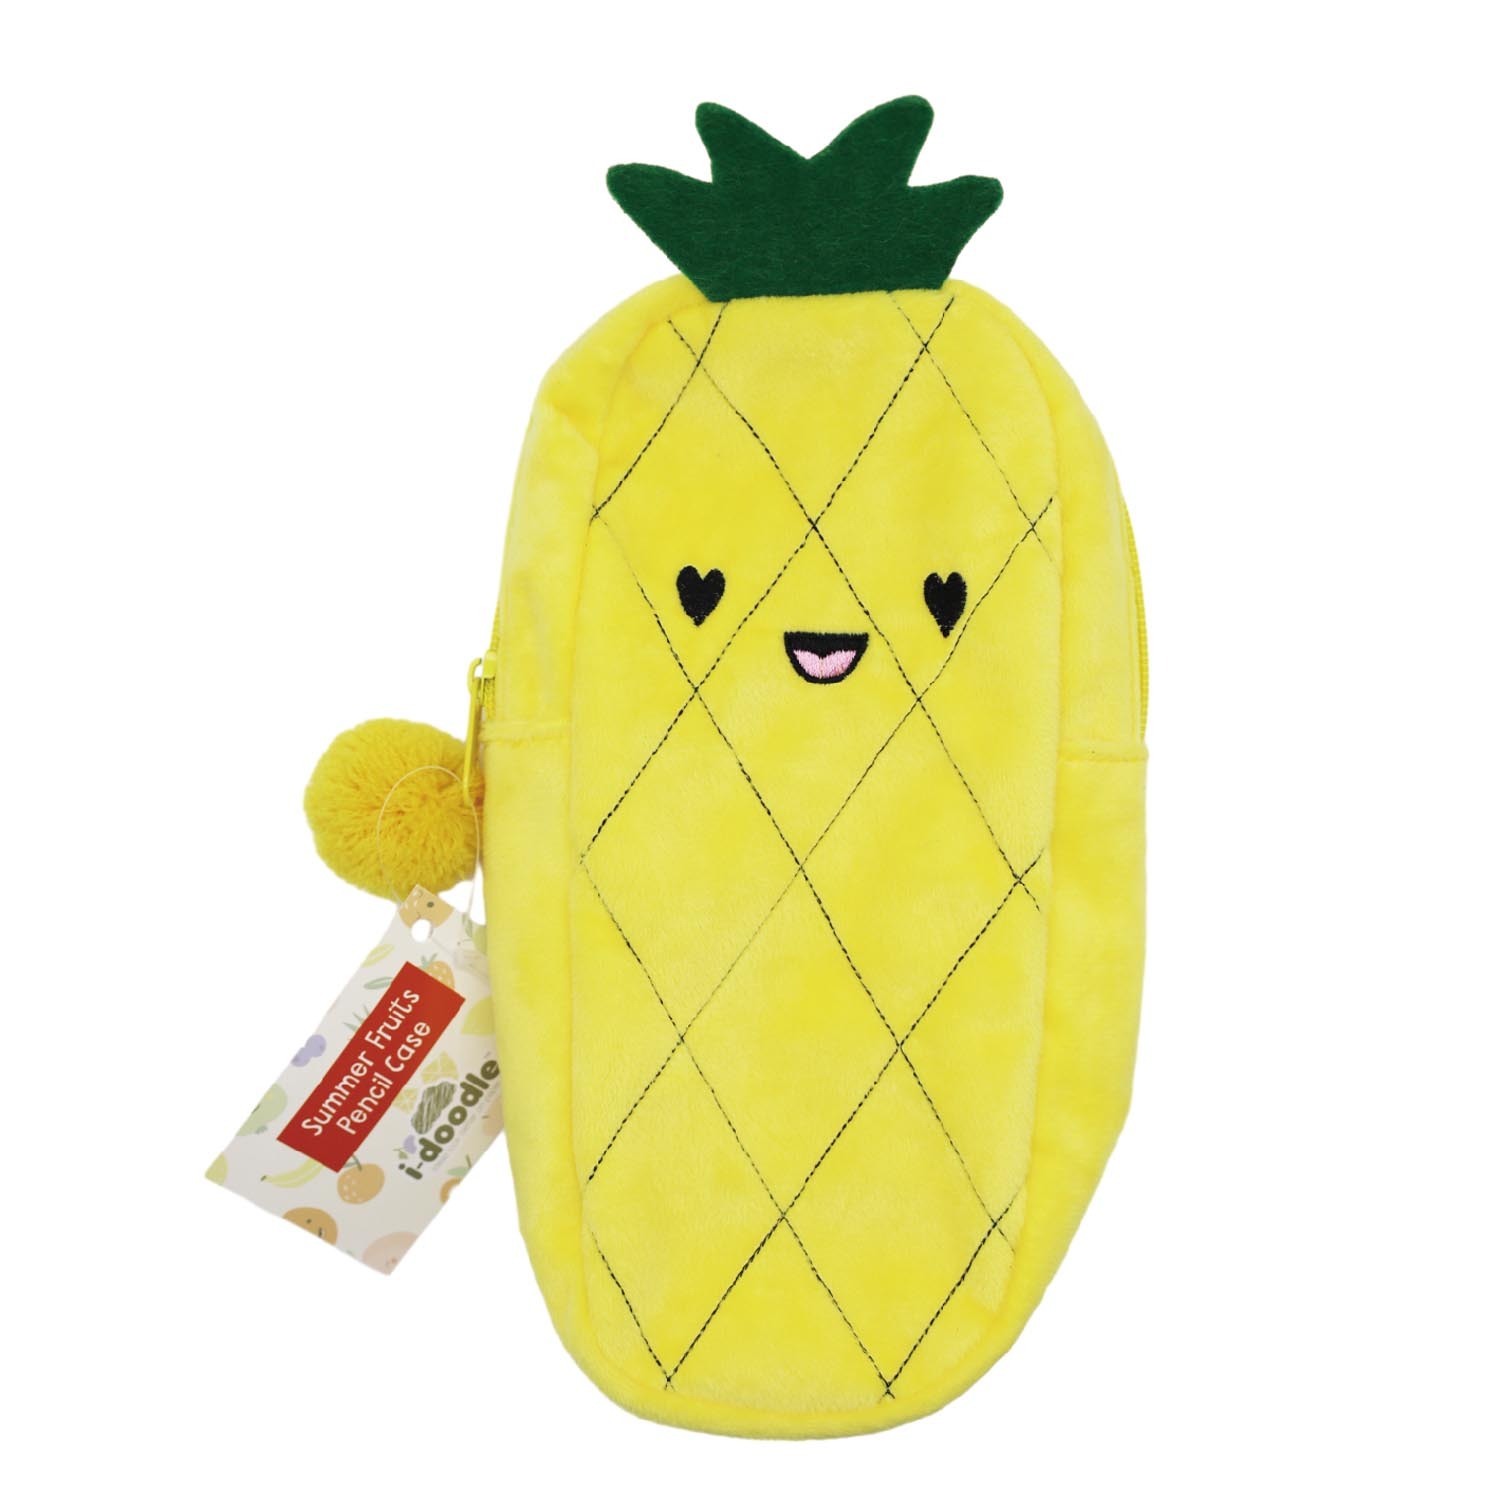 Summer Fruits Pencil Case - Yellow Image 1